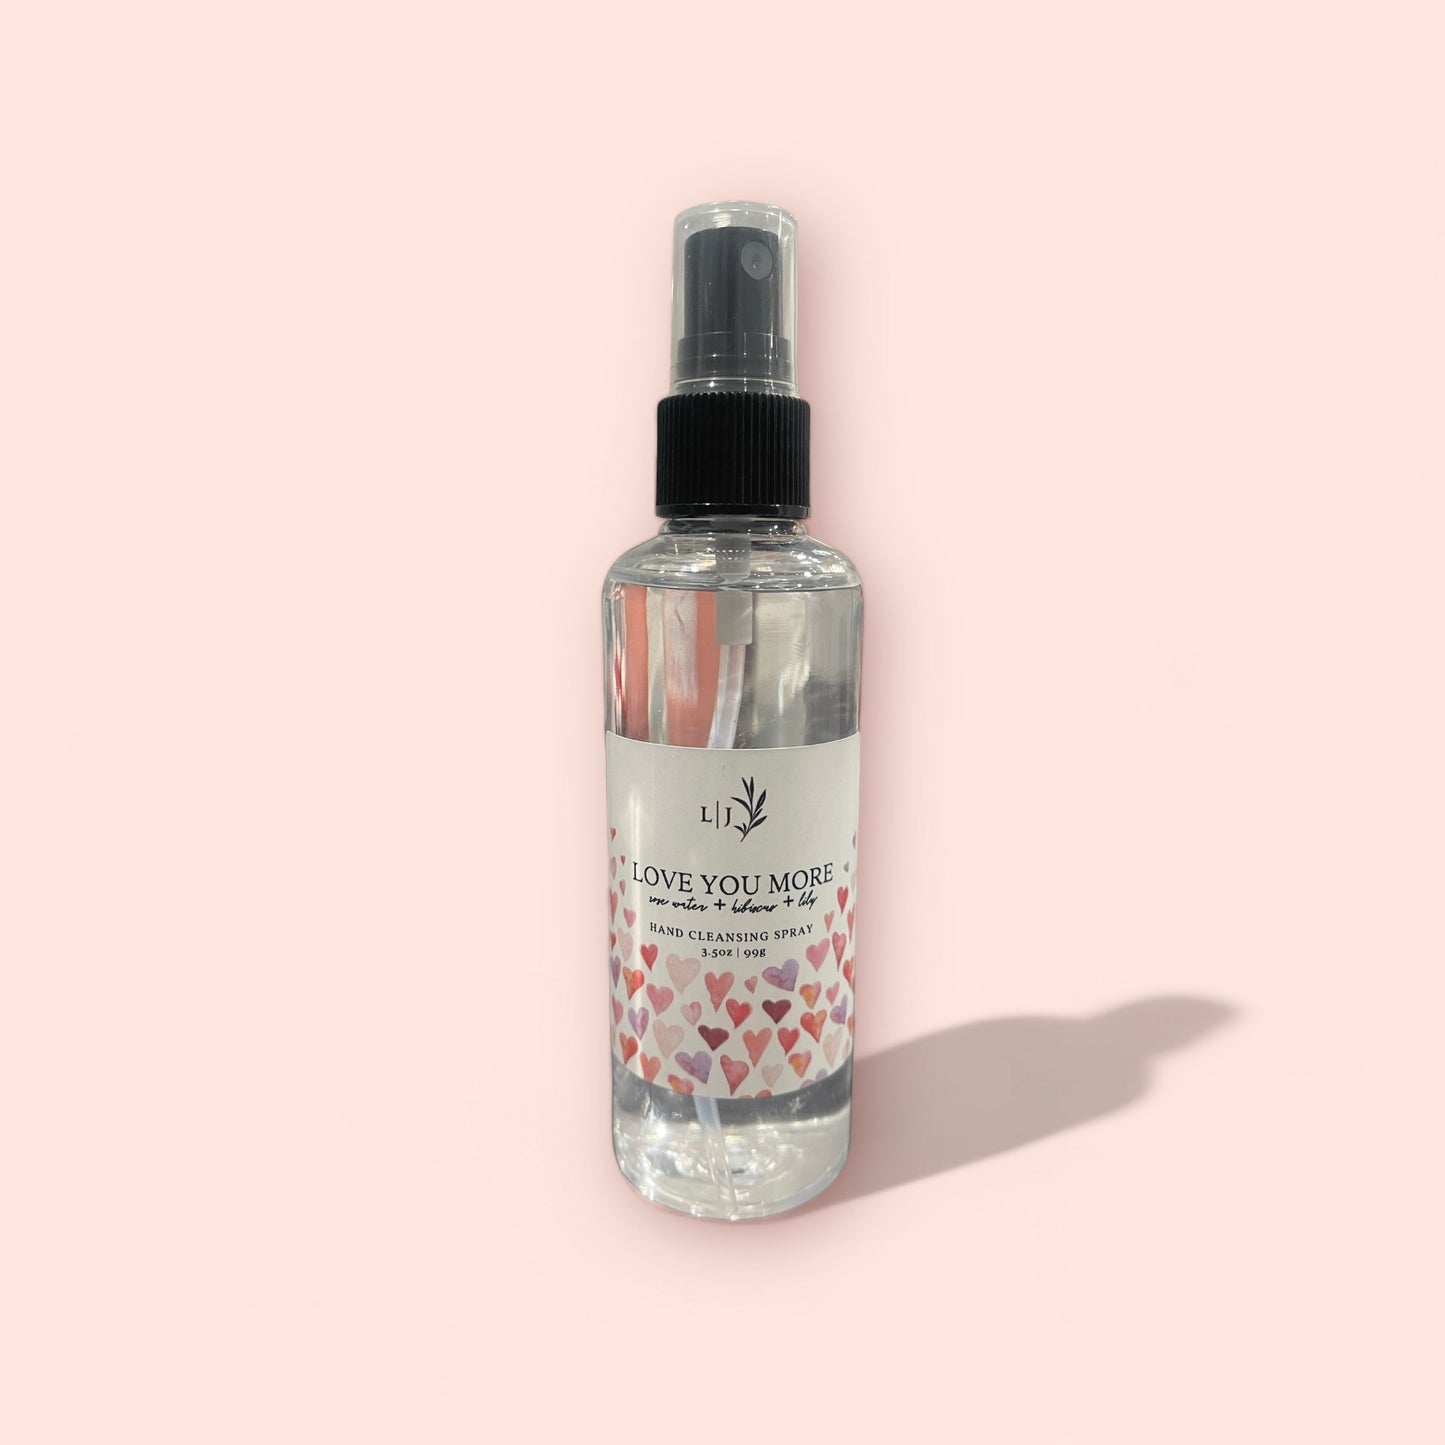 Love you More Hand Cleansing Spray